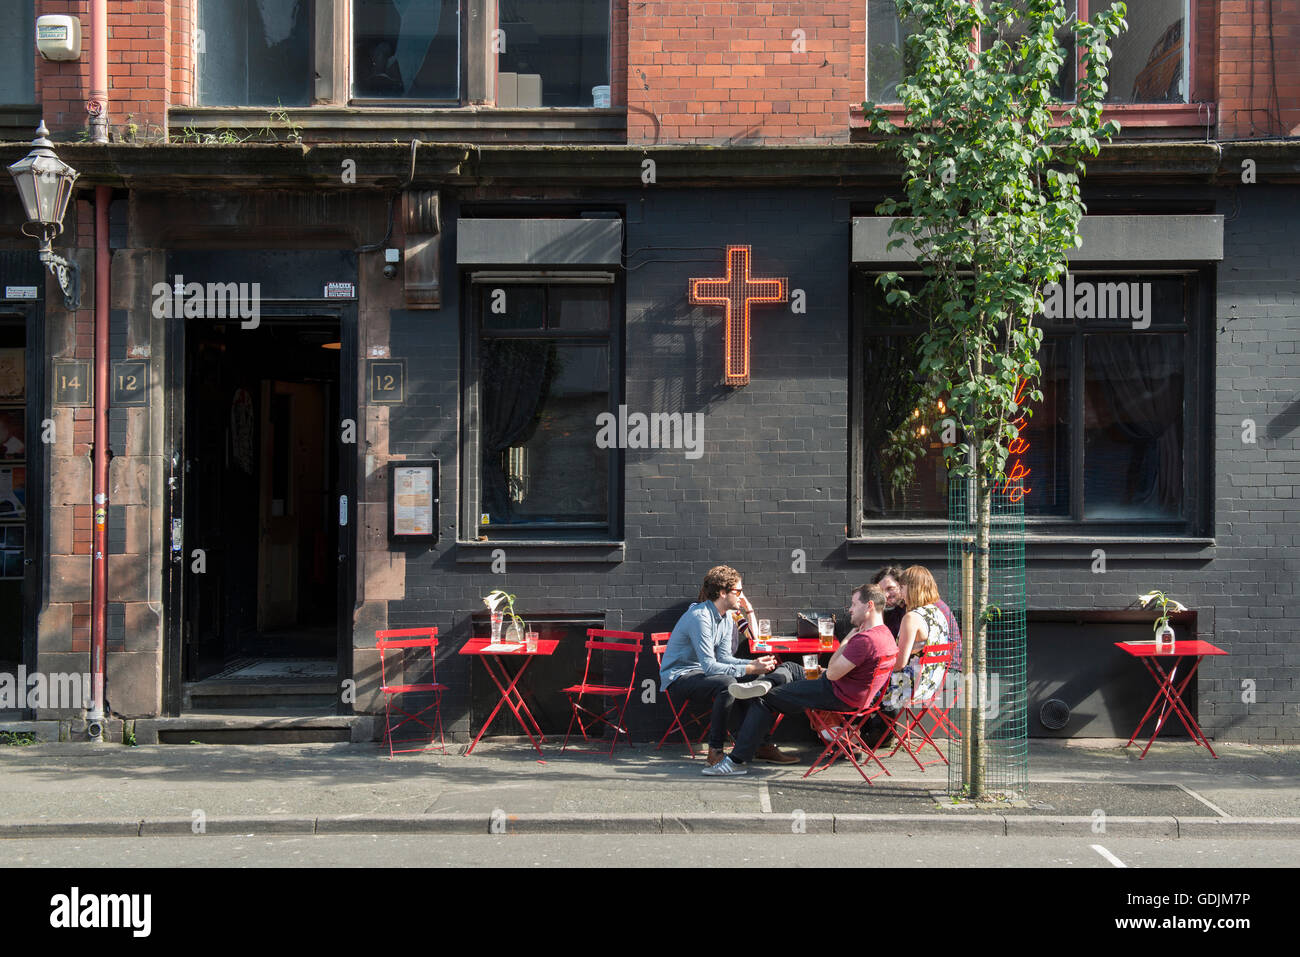 People enjoying a drink outside El Capo bar located on Tariff Street in the Northern Quarter area of Manchester. Stock Photo